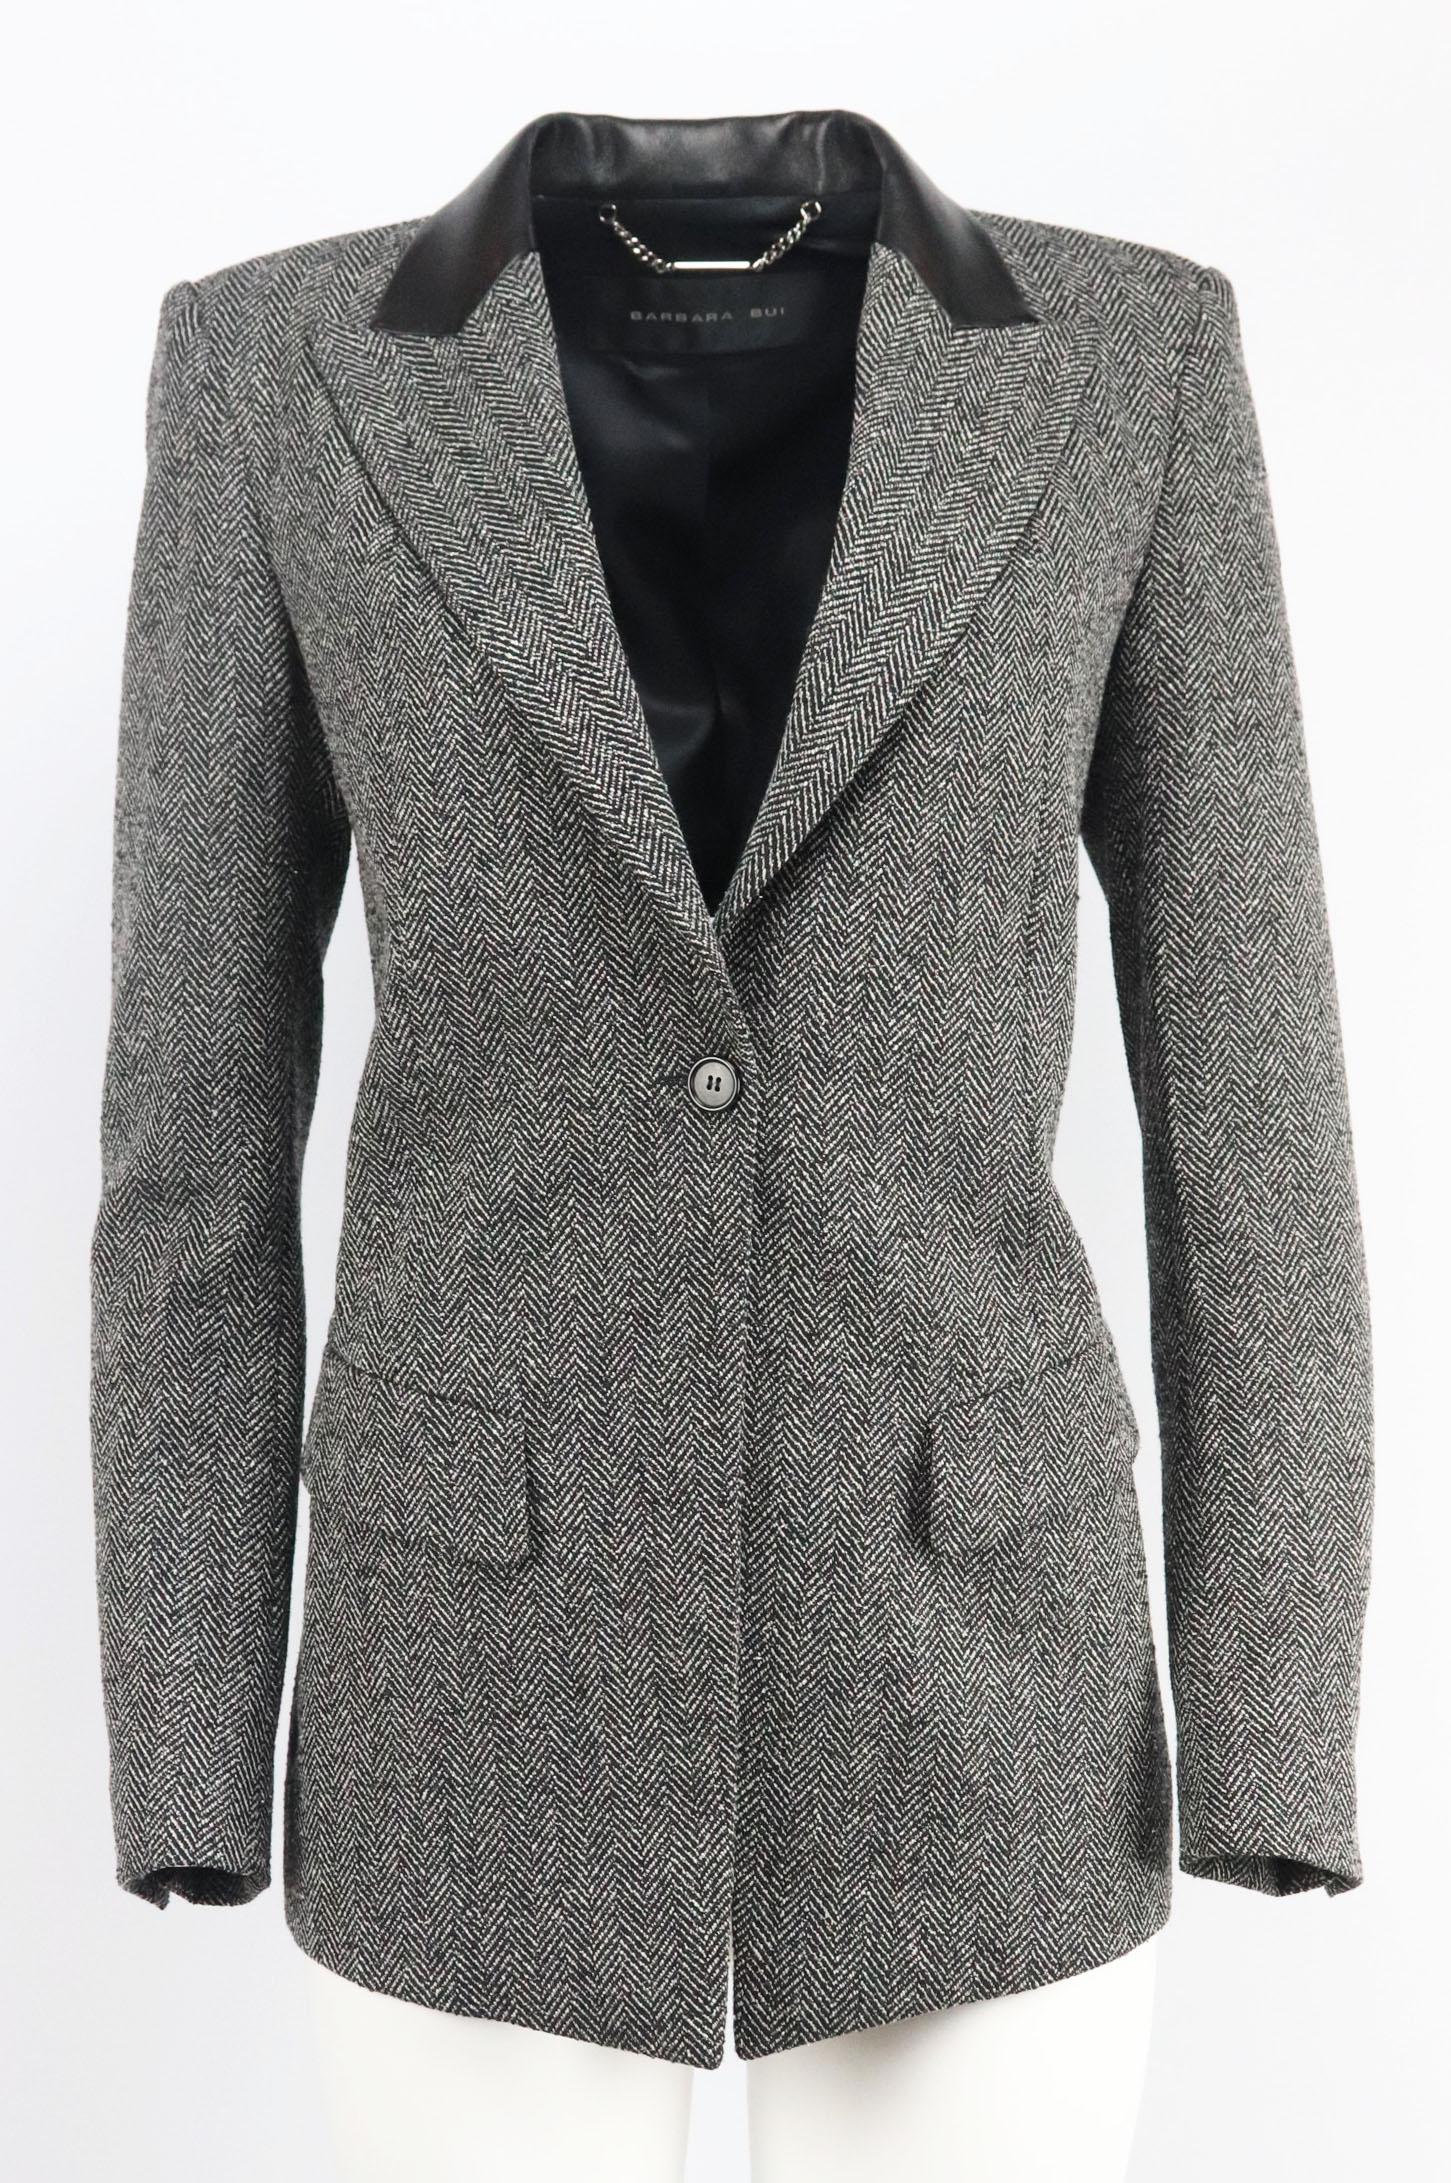 This blazer by Barbara Bui really highlights the designer's impeccable tailoring skills, cut from herringbone wool-blend, it has a structured silhouette with padded shoulders and sharp leather-trimmed peak lapels to add a big of edge.
Black and grey